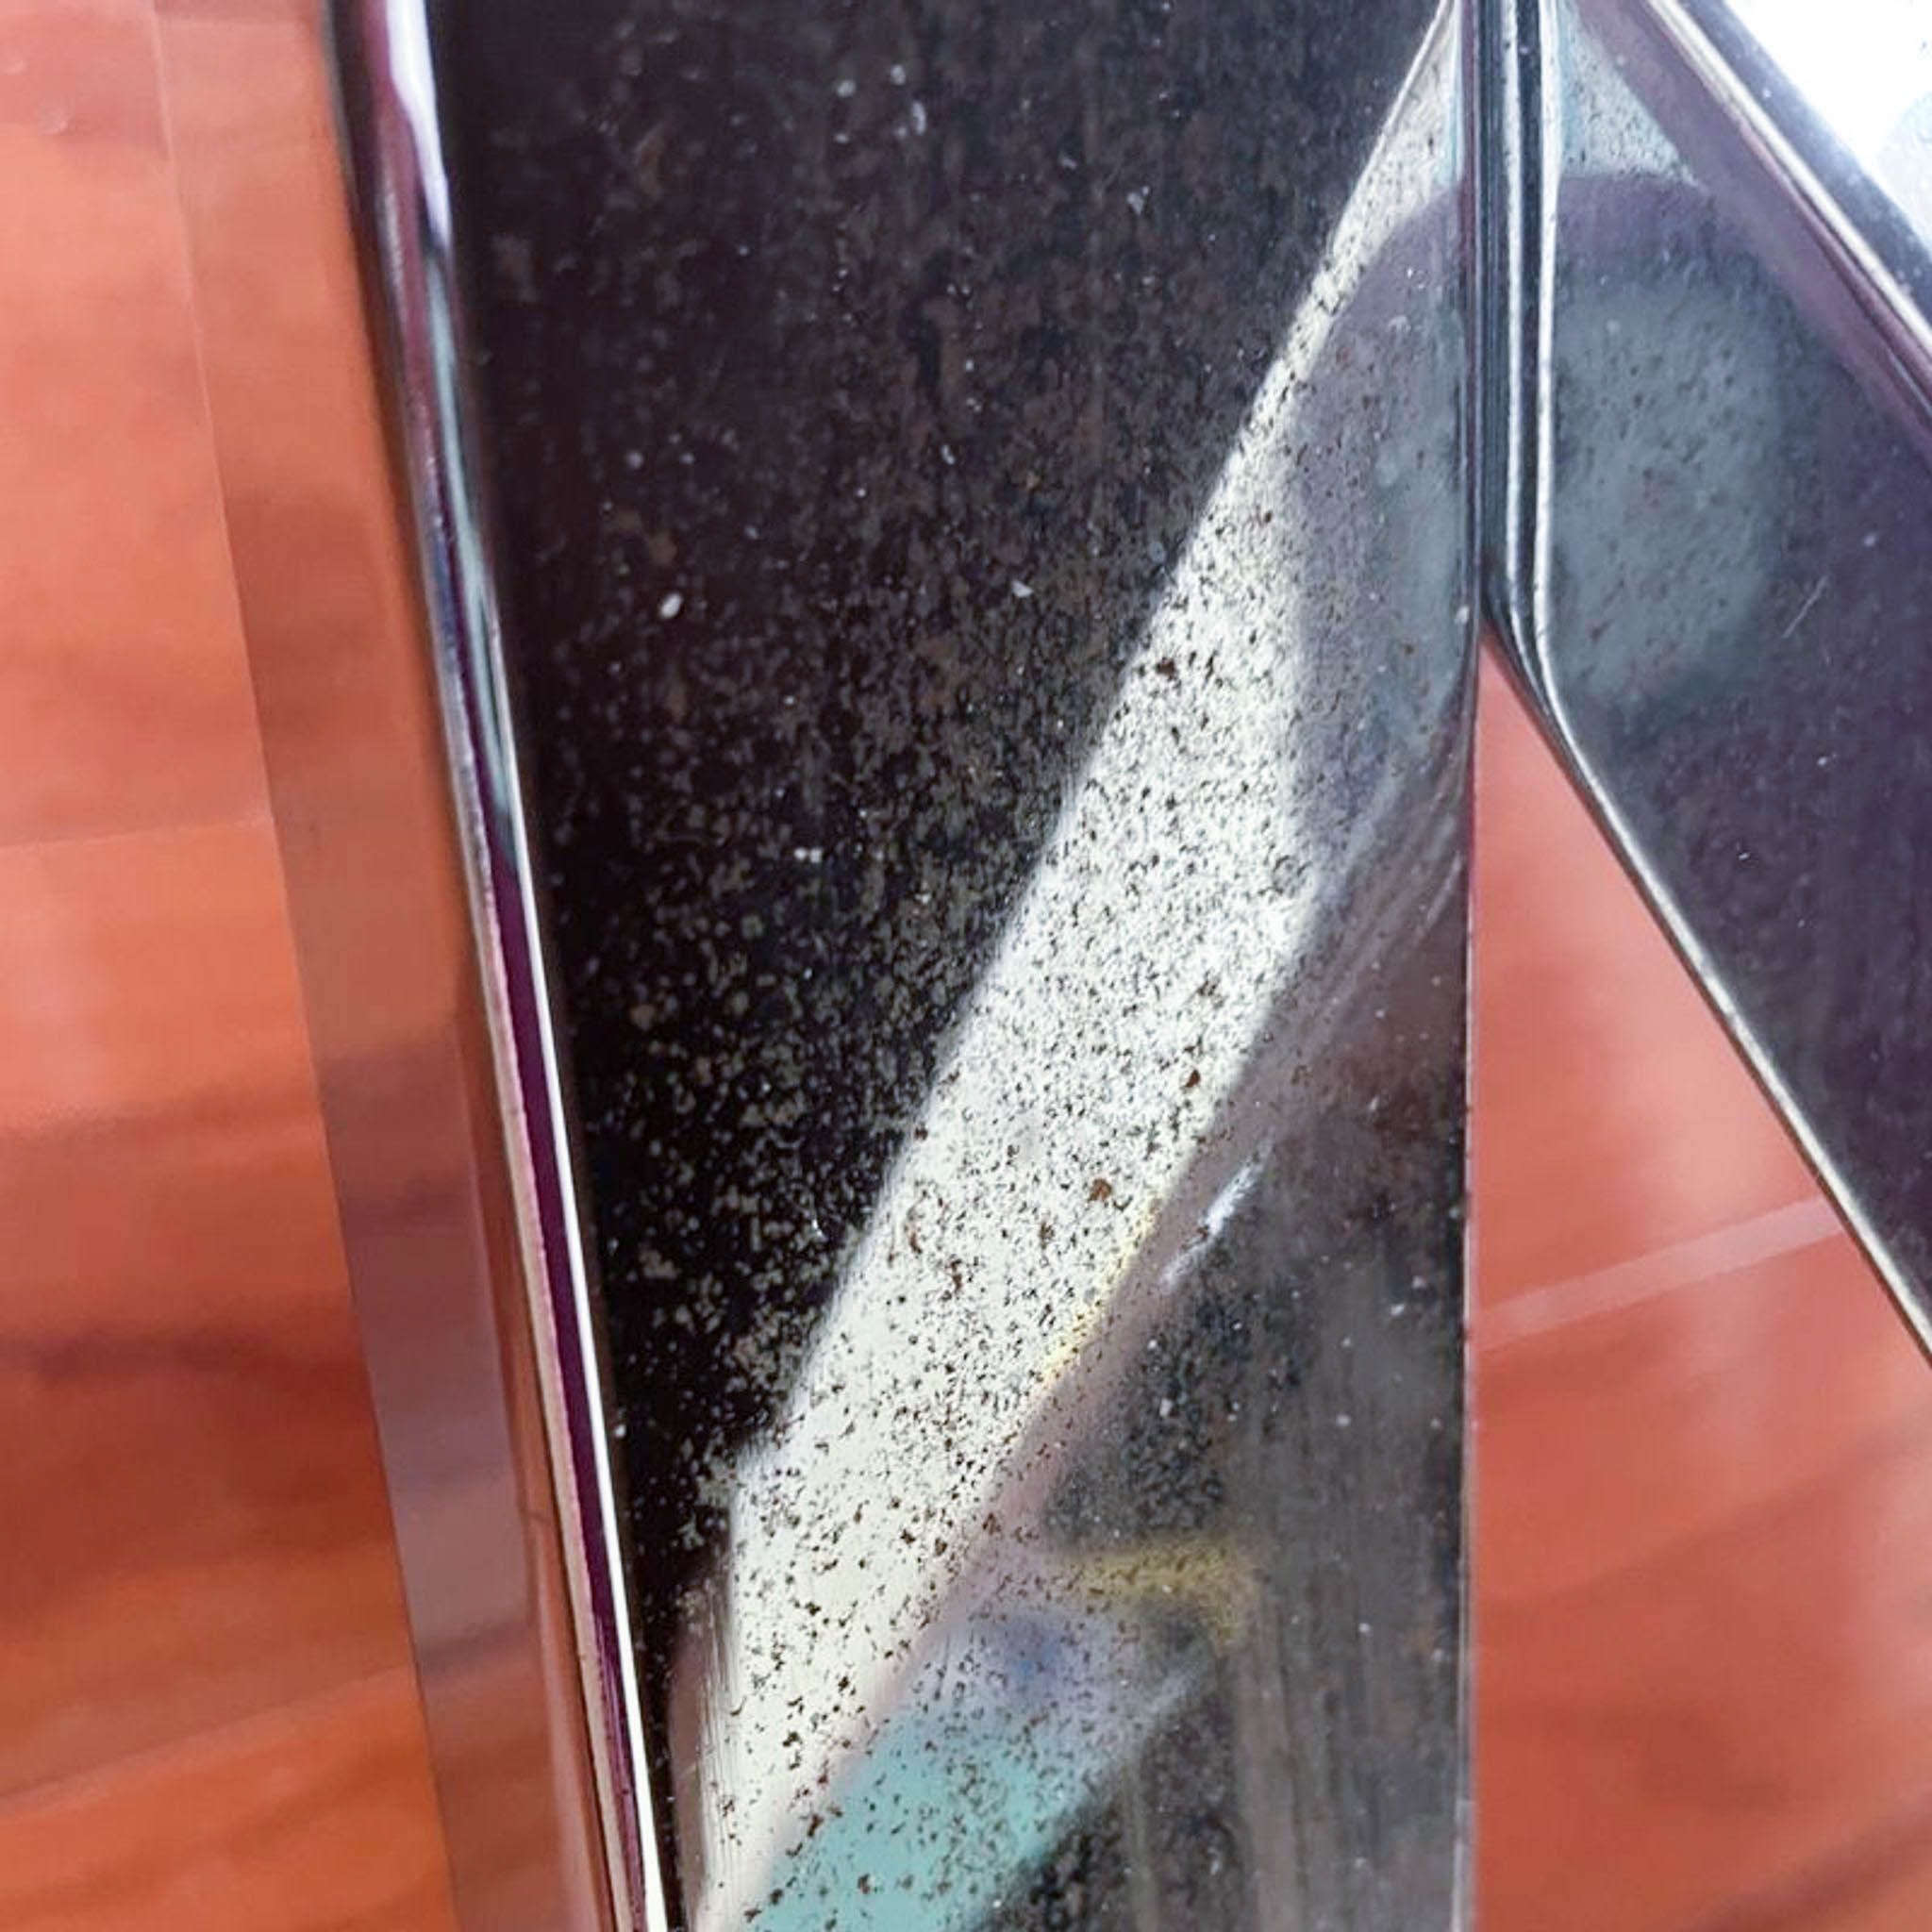 Alt text 2: Close-up of tarnished metal coffee table frame detail, showing signs of wear and tarnish, from Cost Plus brand.